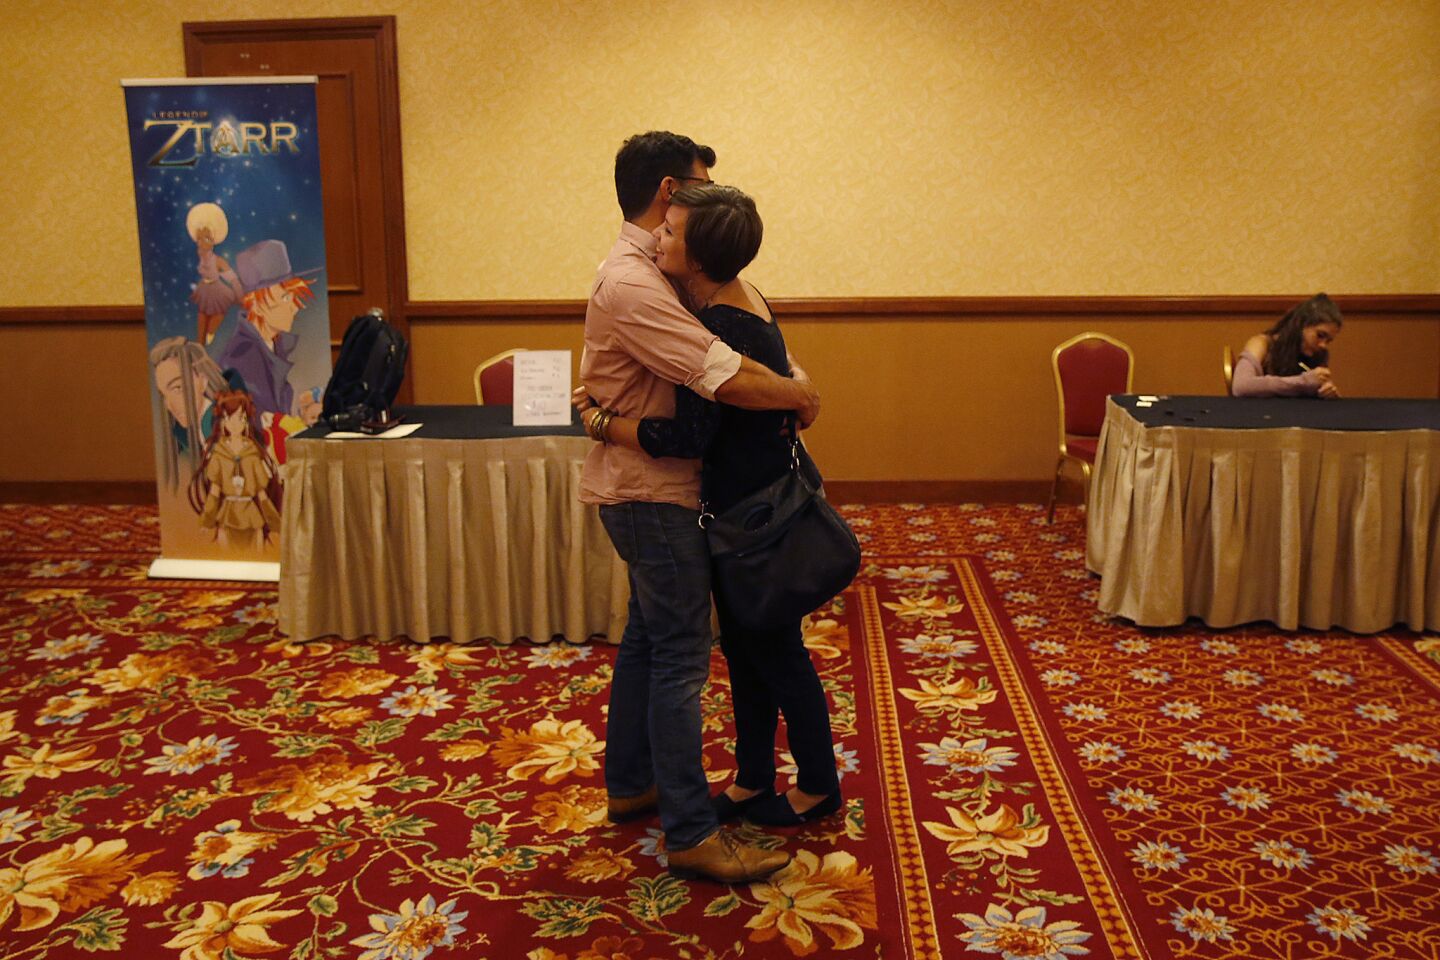 Ryan Bell hugs his girlfriend Rebecca Pratt at the conference of atheists, skeptics and freethinkers in Las Vegas. Pratt is open-minded and unafraid to stop Bell when he lapses into negative generalizations about religion.